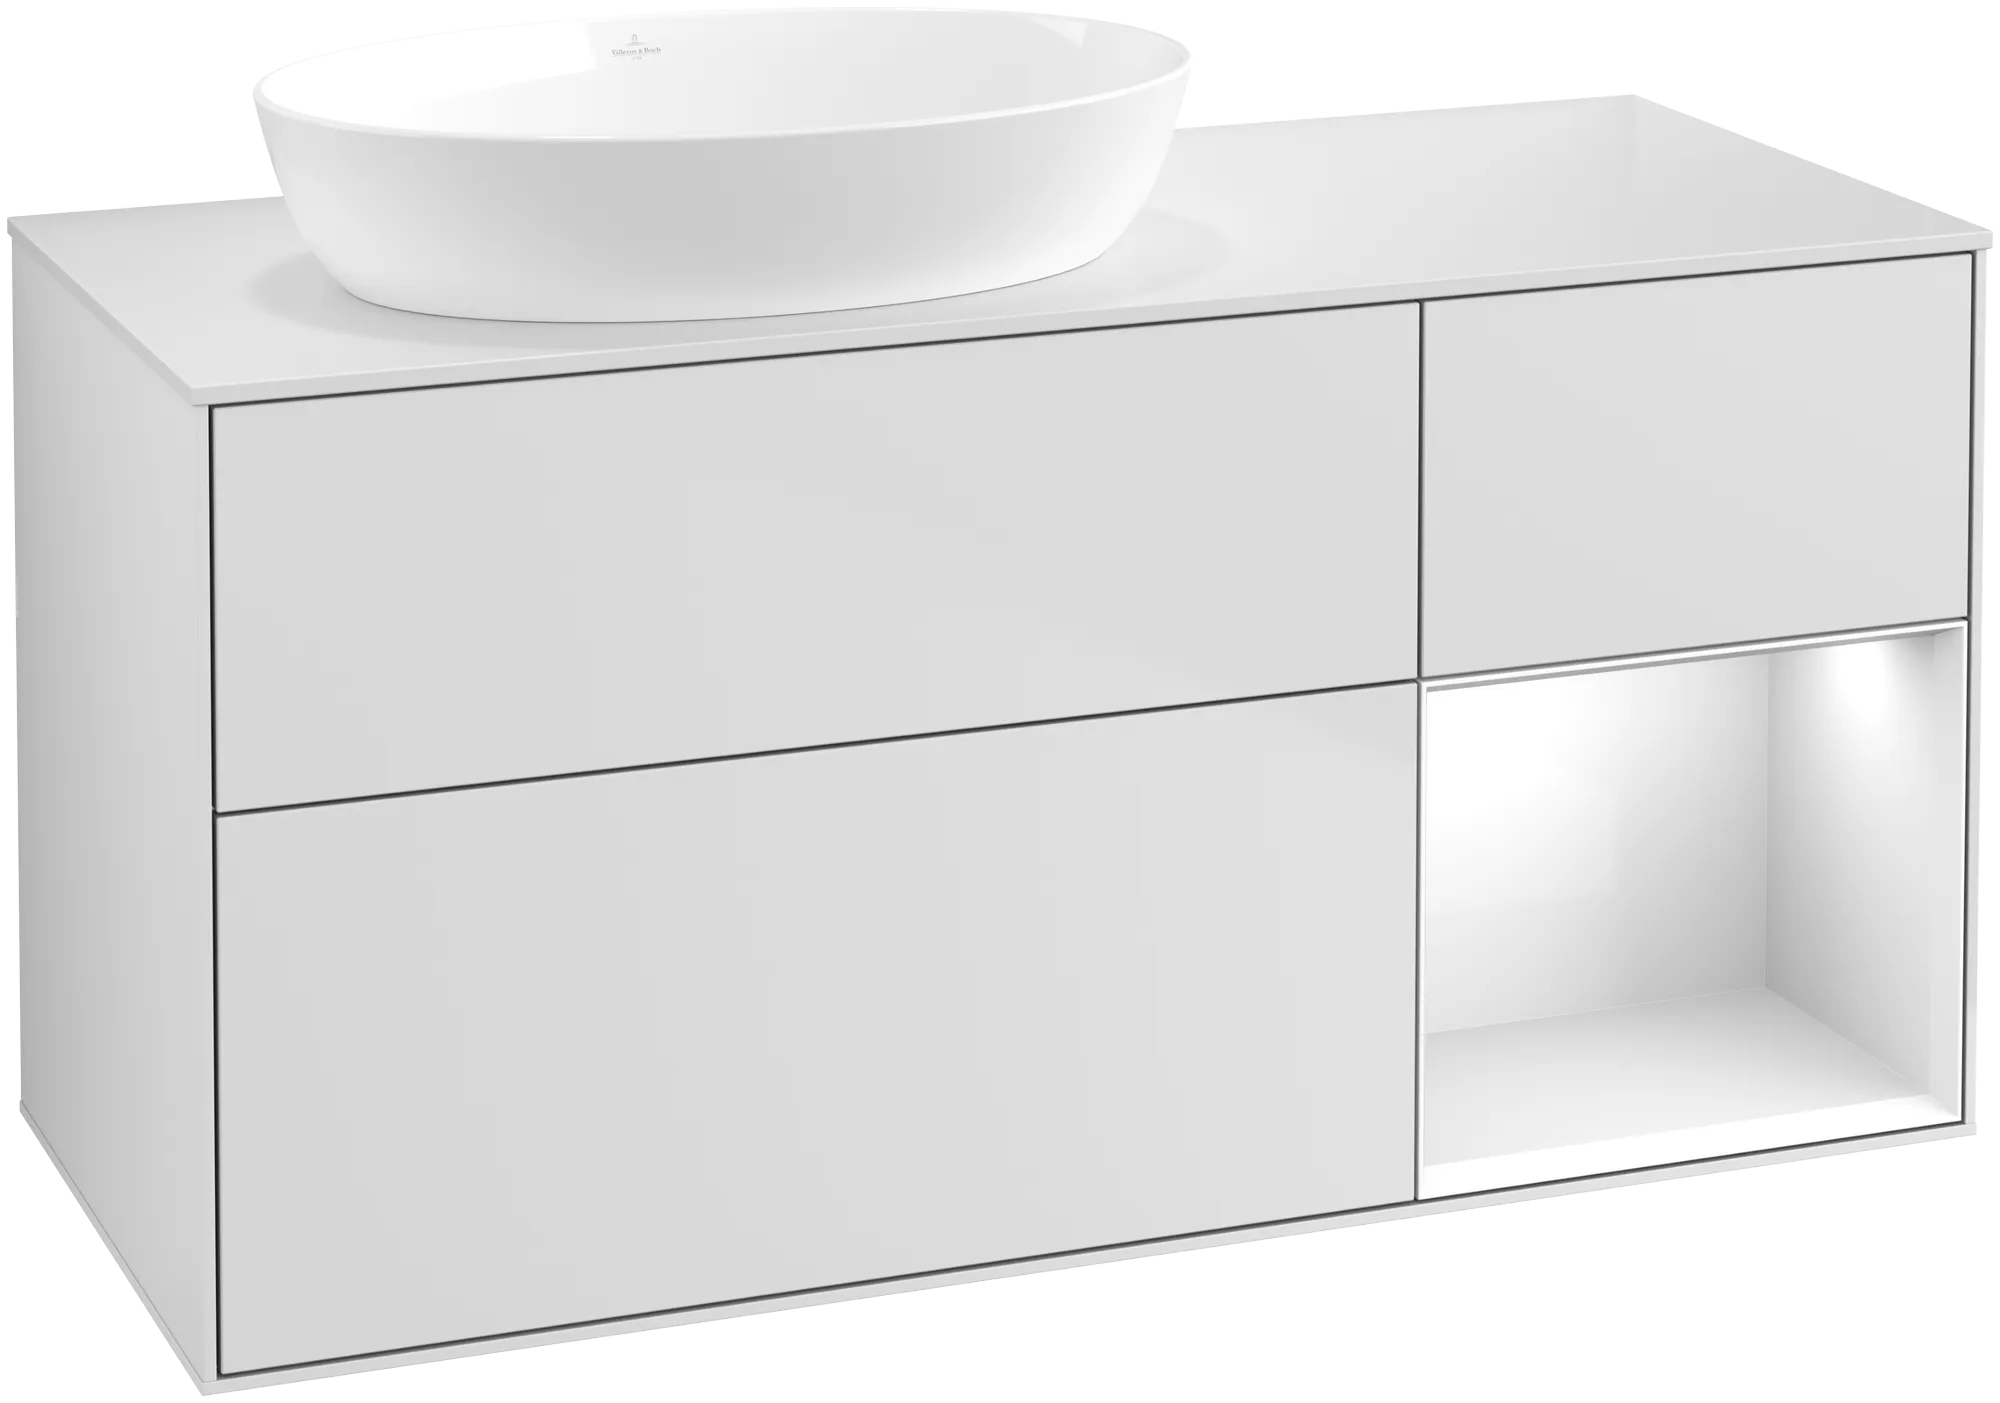 Obrázek VILLEROY BOCH Finion Vanity unit, with lighting, 3 pull-out compartments, 1200 x 603 x 501 mm, White Matt Lacquer / Glossy White Lacquer / Glass White Matt #FA51GFMT